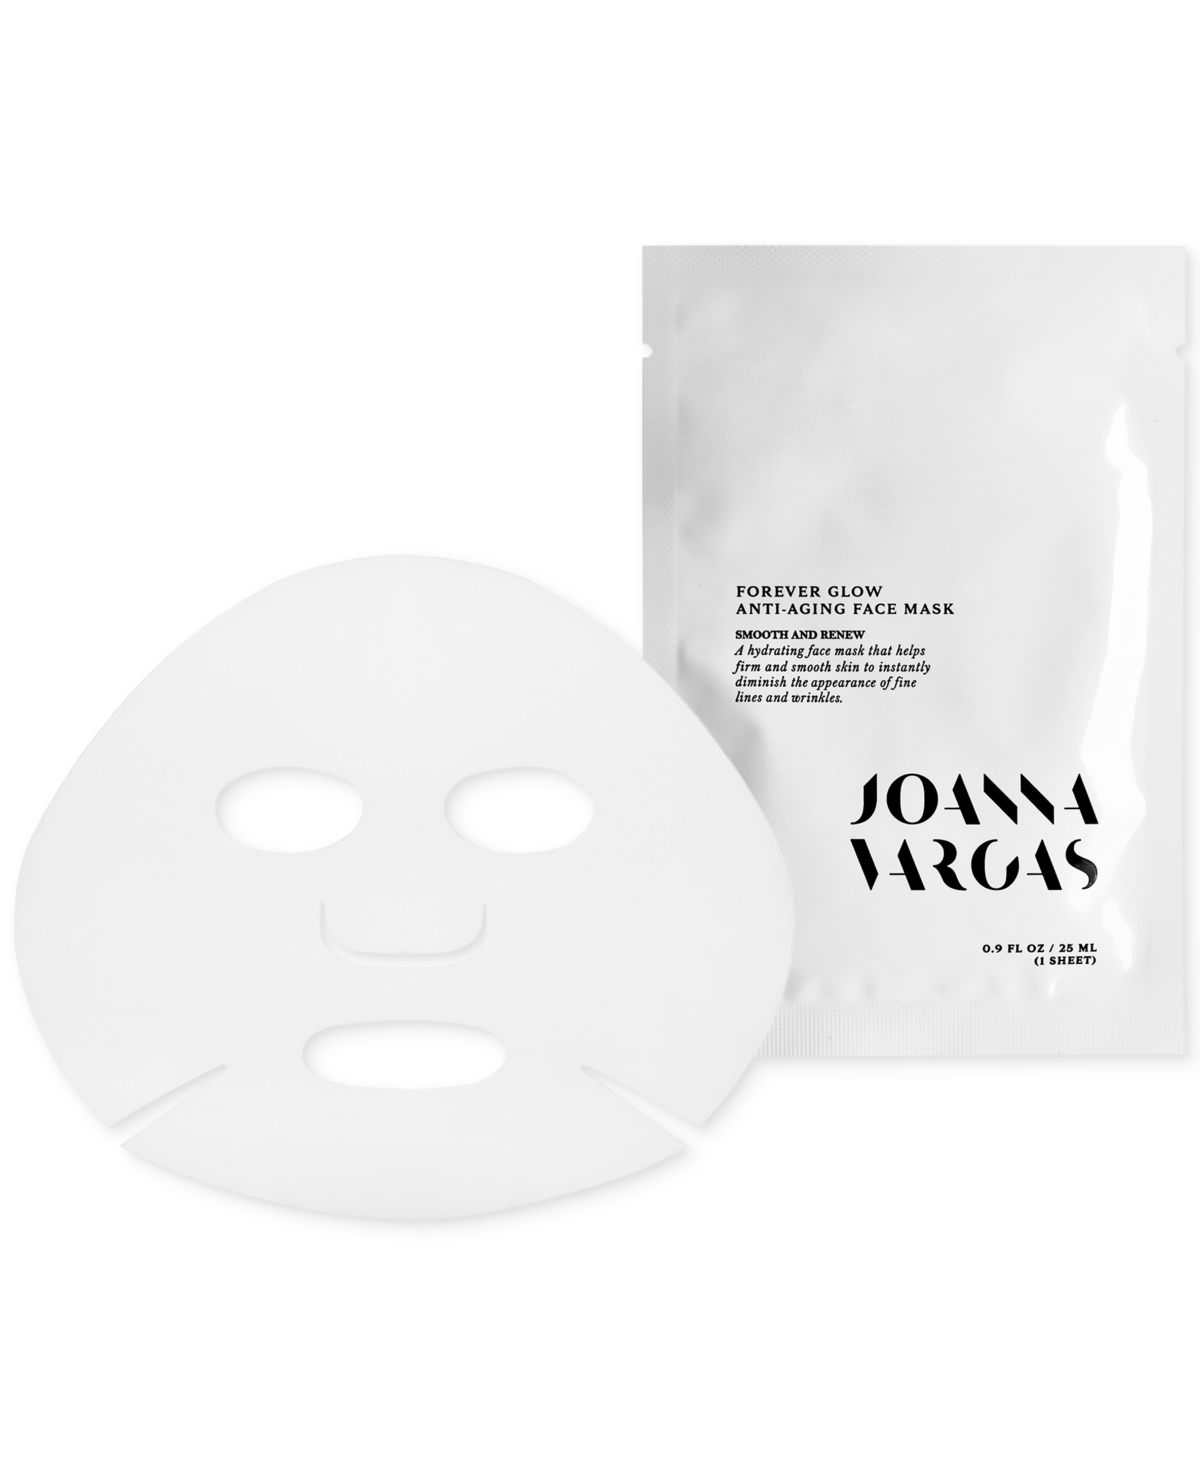 Forever Glow Anti-Aging Face Mask, 5-Pk.